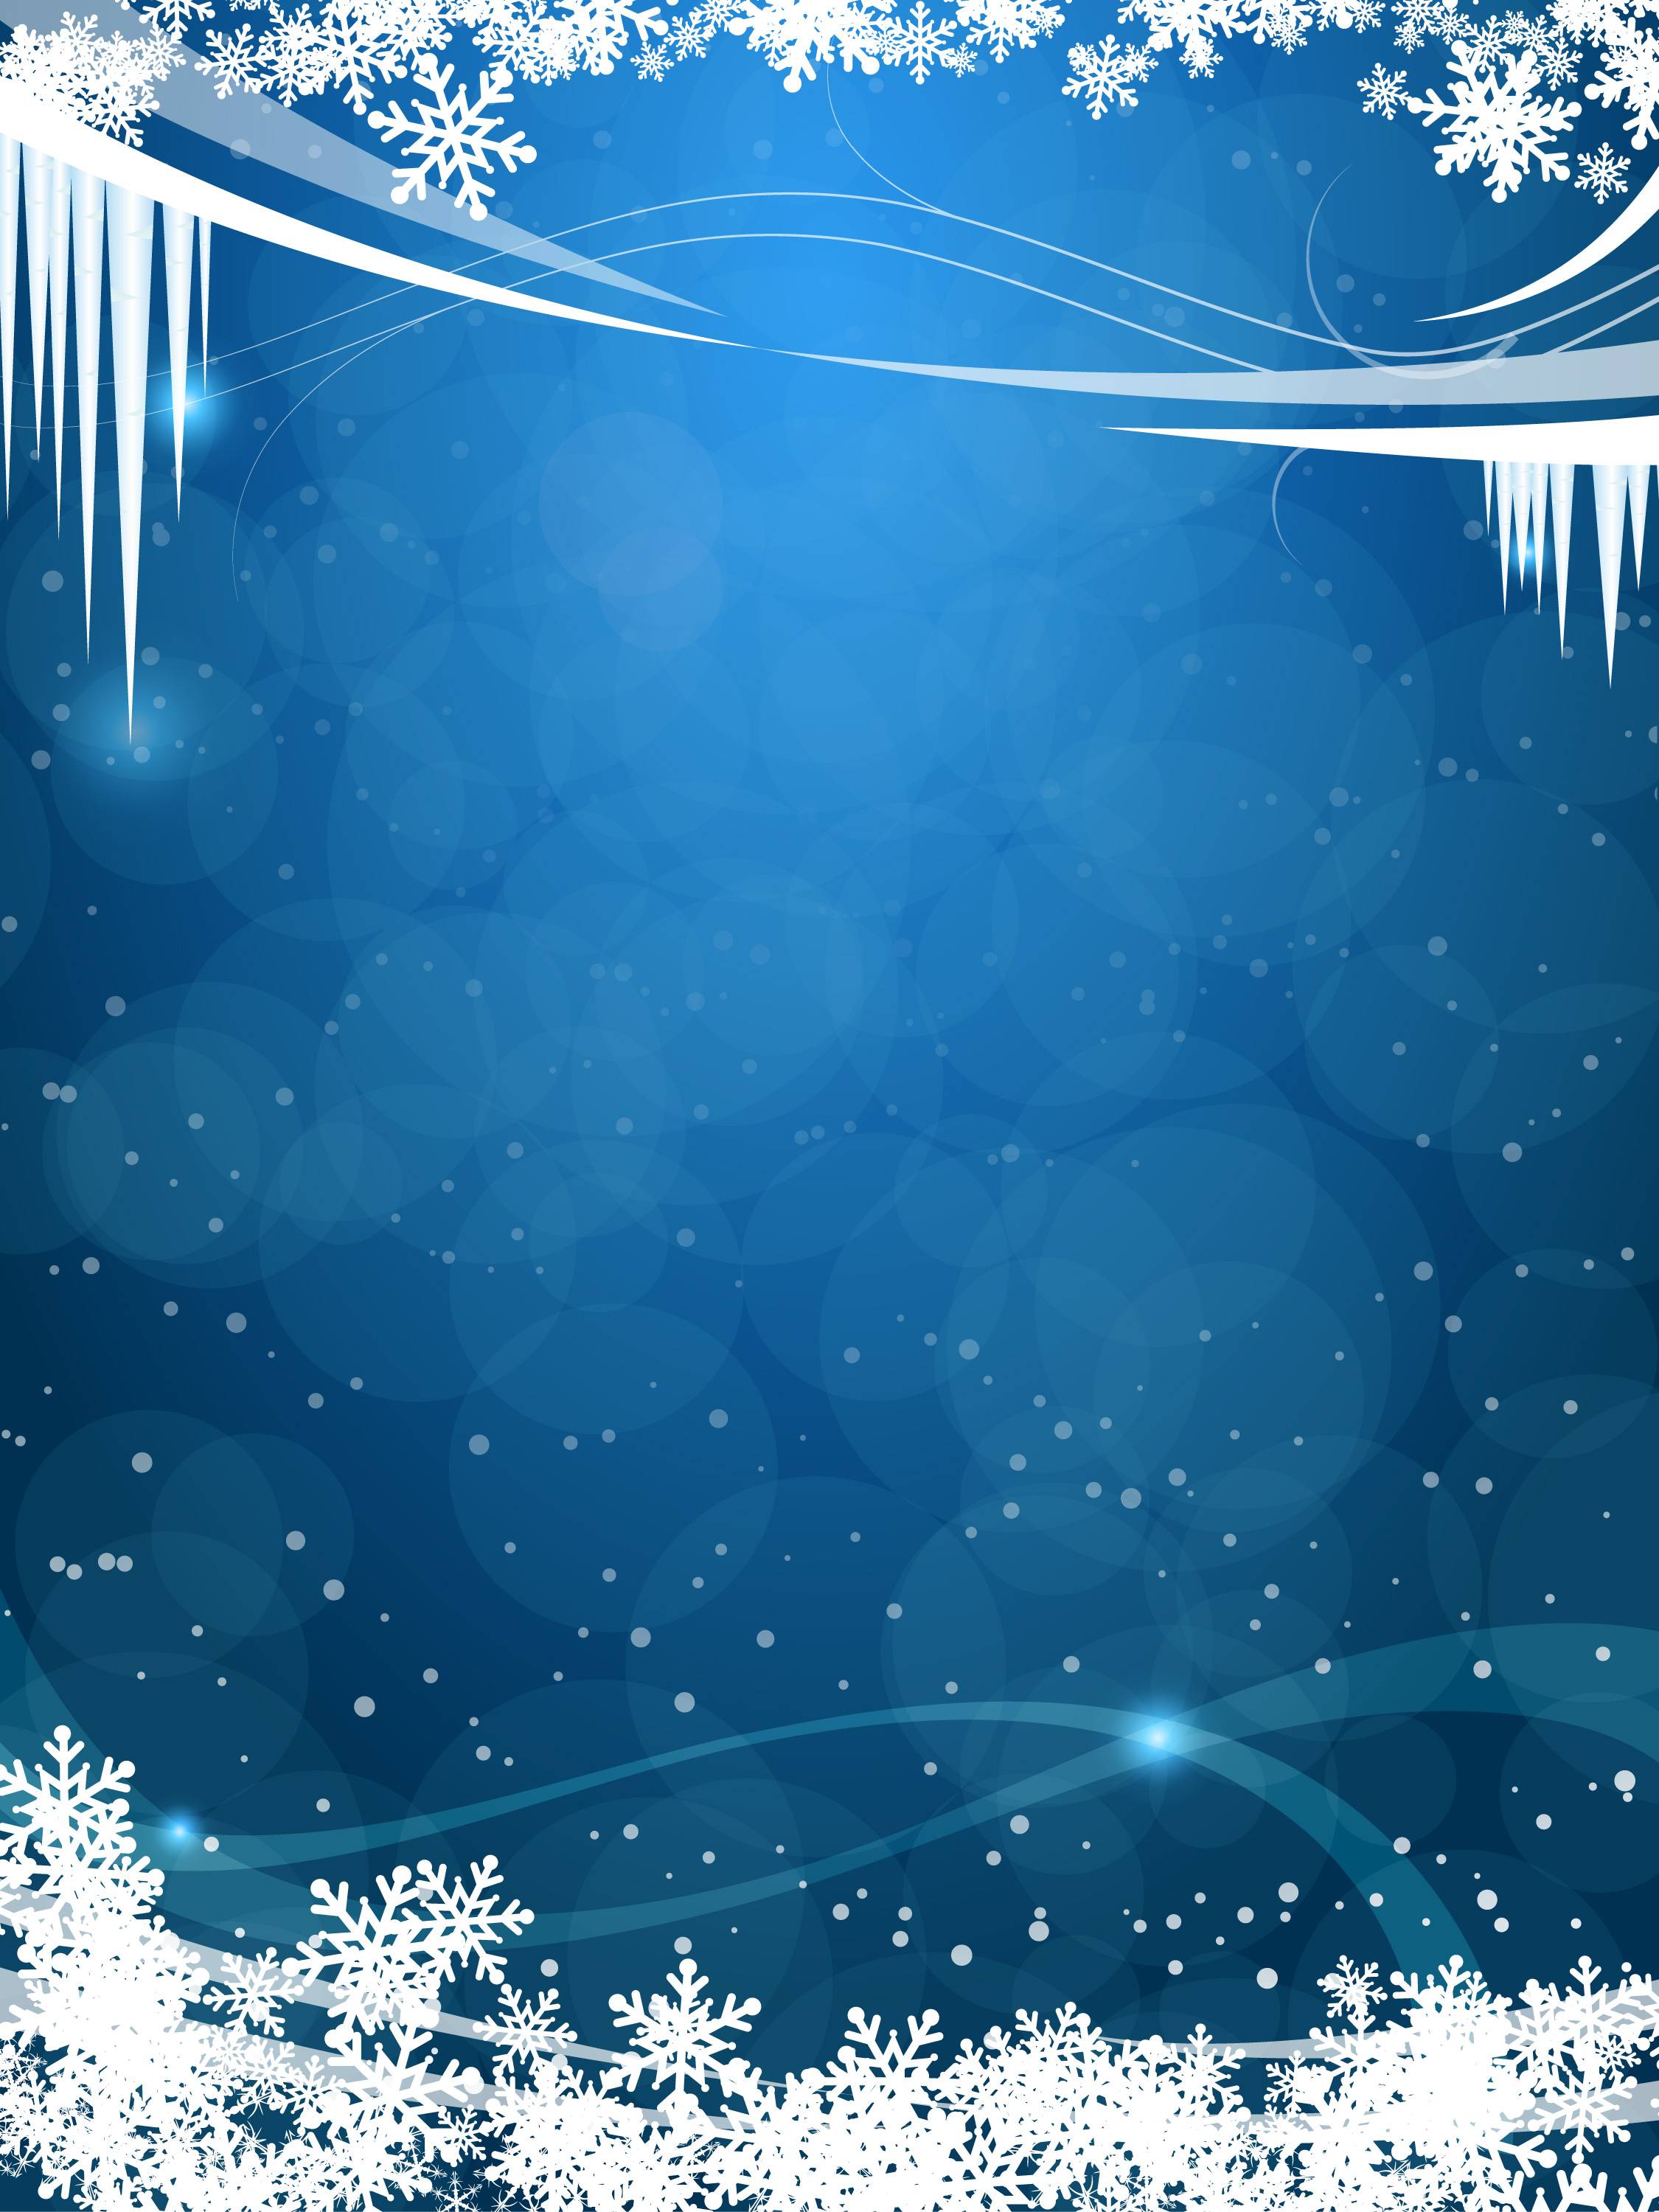 Snow Backgrounds - Wallpaper Cave